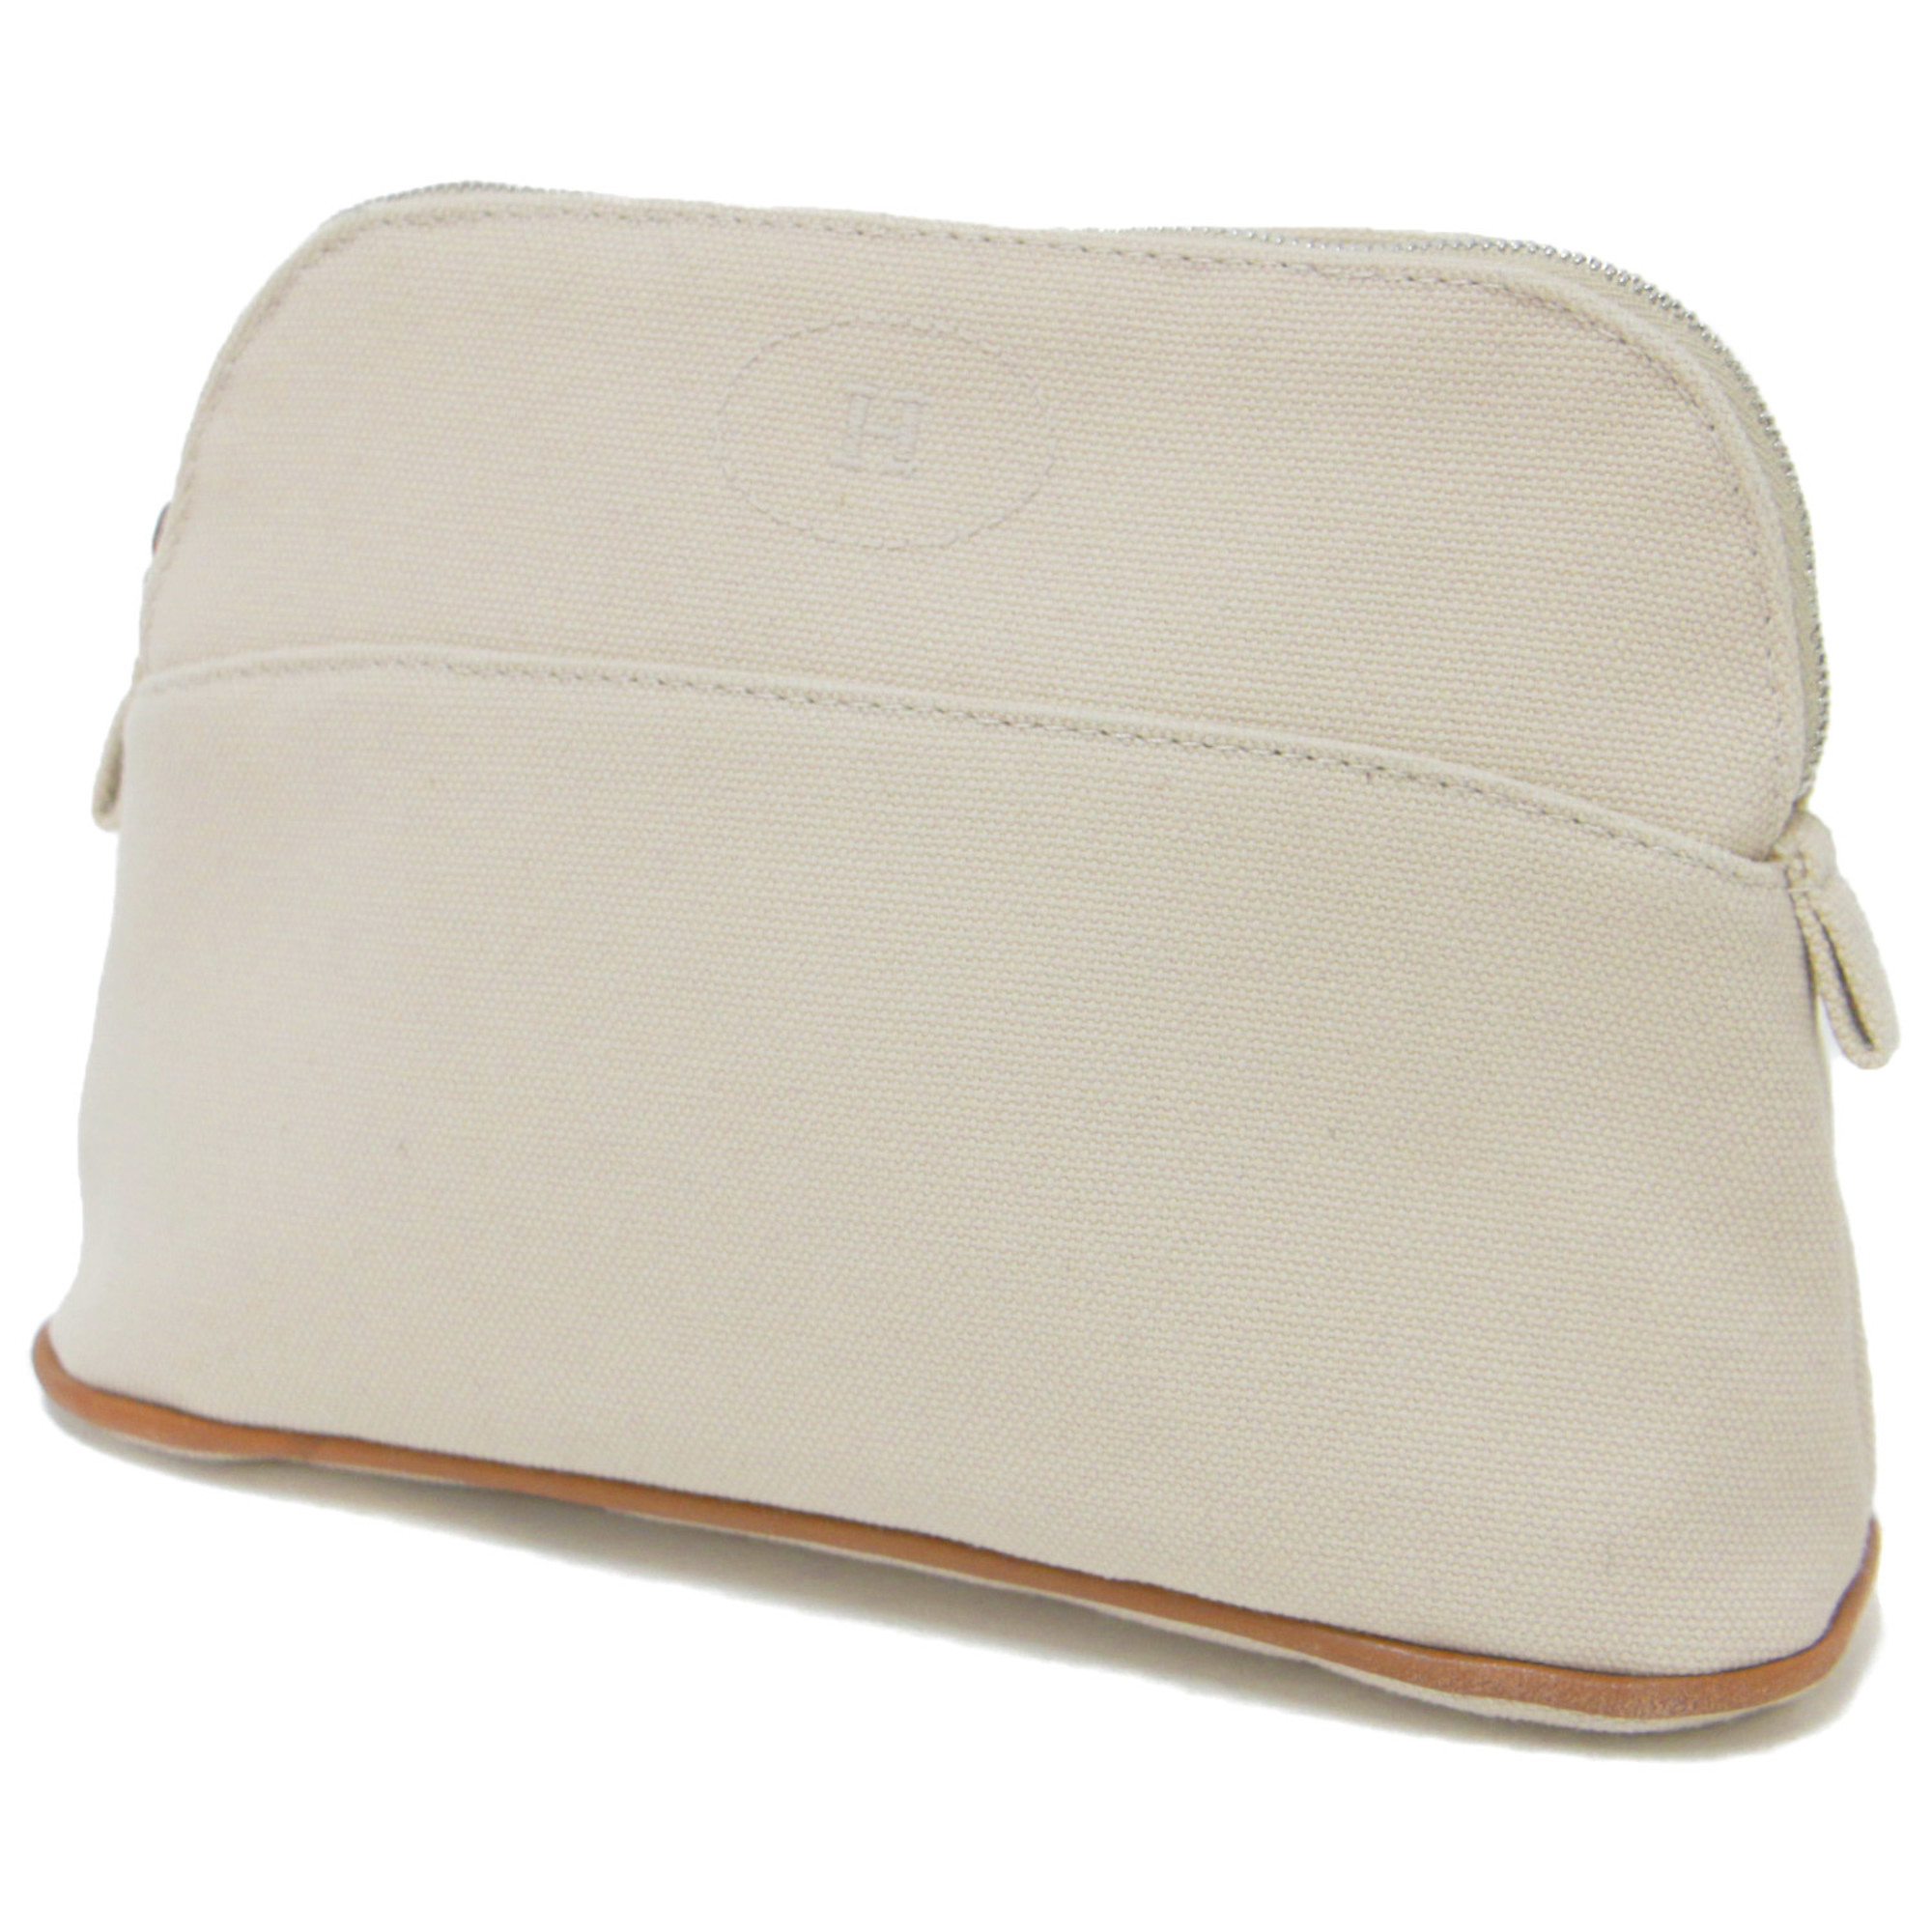 HERMES Hermes Pouch Accessory Case Light Beige Kinari Zipper Logo Embroidery Leather Piping Canvas Bolide PM 20 Mini Made in France